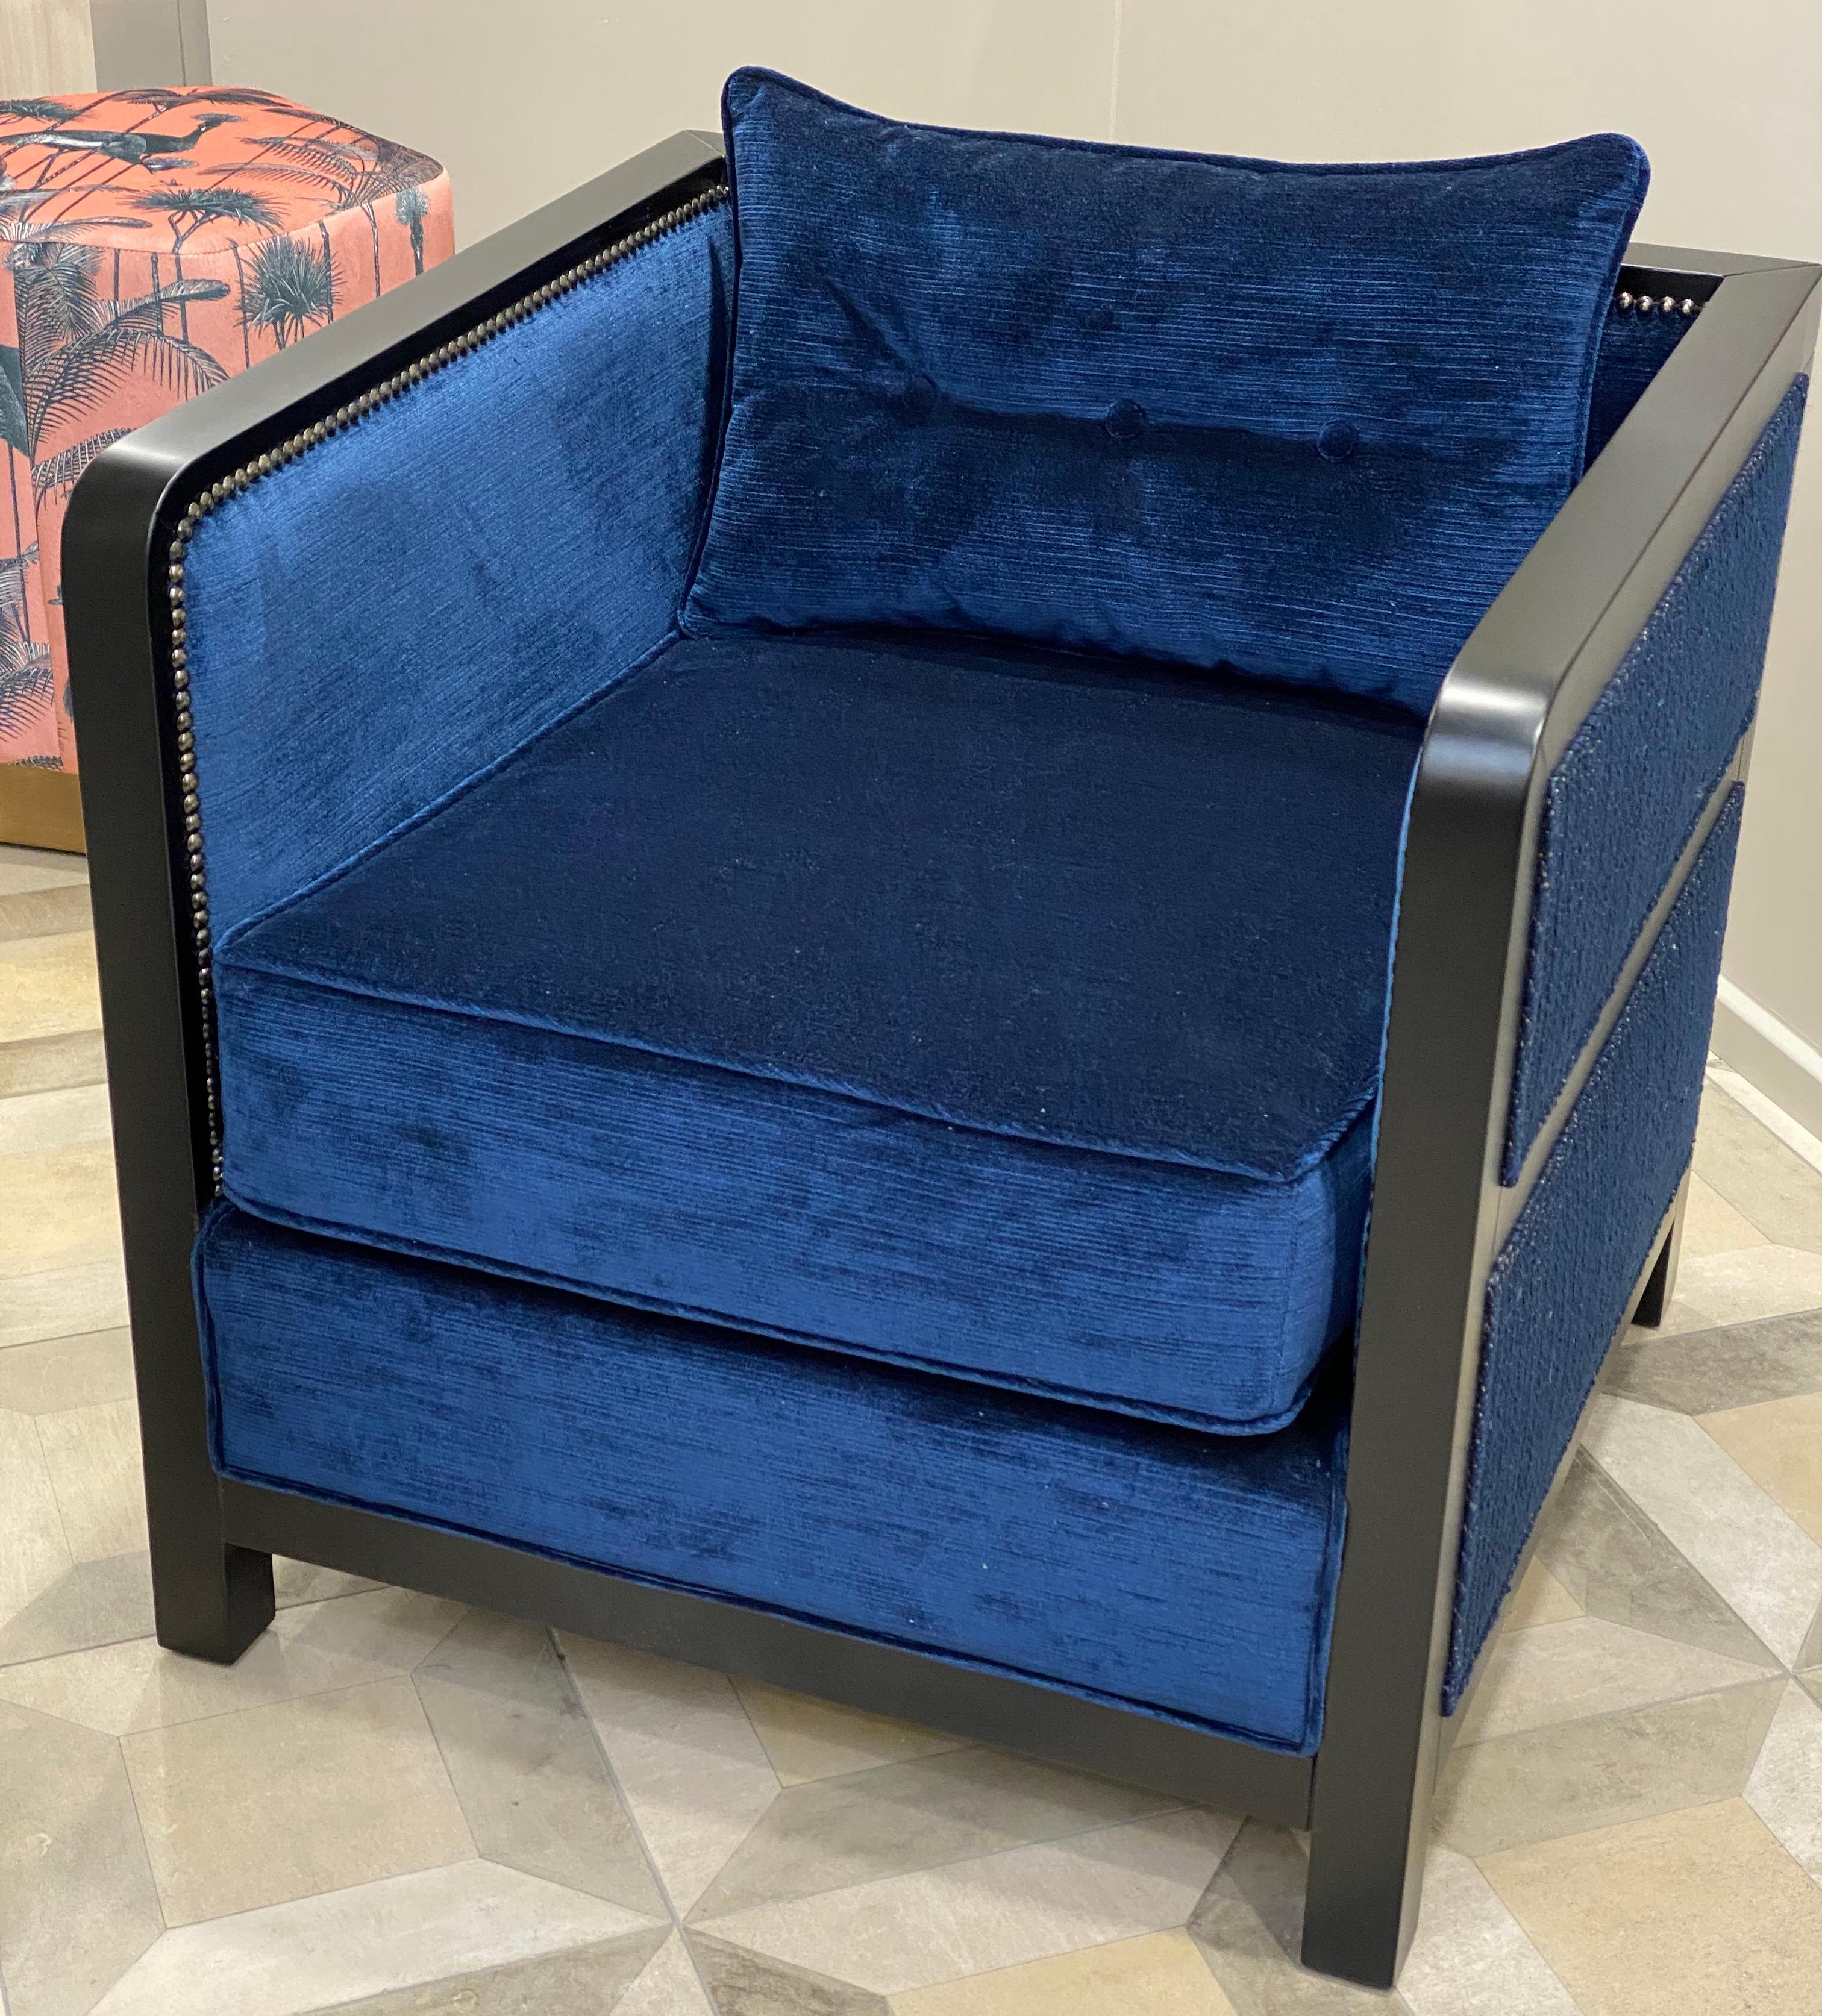 The Bacco armchair design is a magnificent fusion of Art Deco inspiration and contemporary style, offering a daring and refined interpretation of the classic boxy chair. With an unwavering commitment to pushing the boundaries of design, the